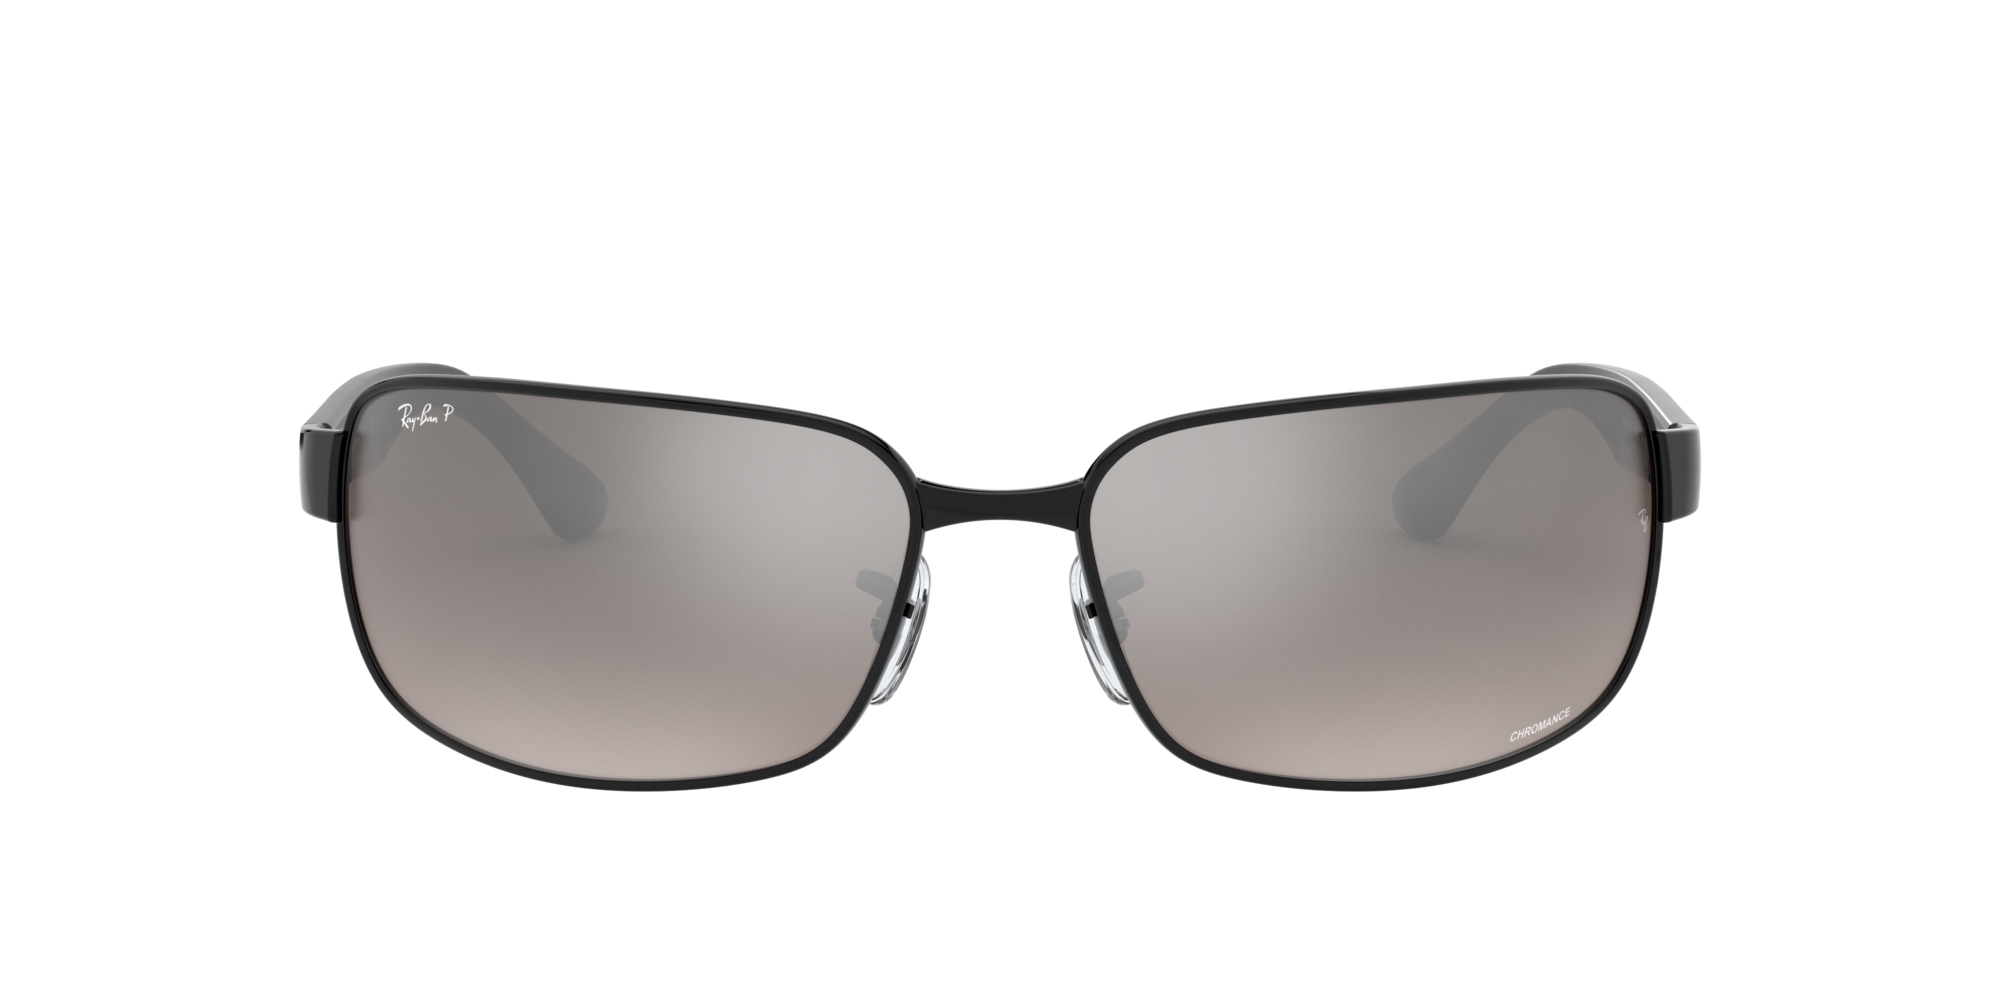 Ray Ban 0rb3566ch Sunglasses In Black Target Optical